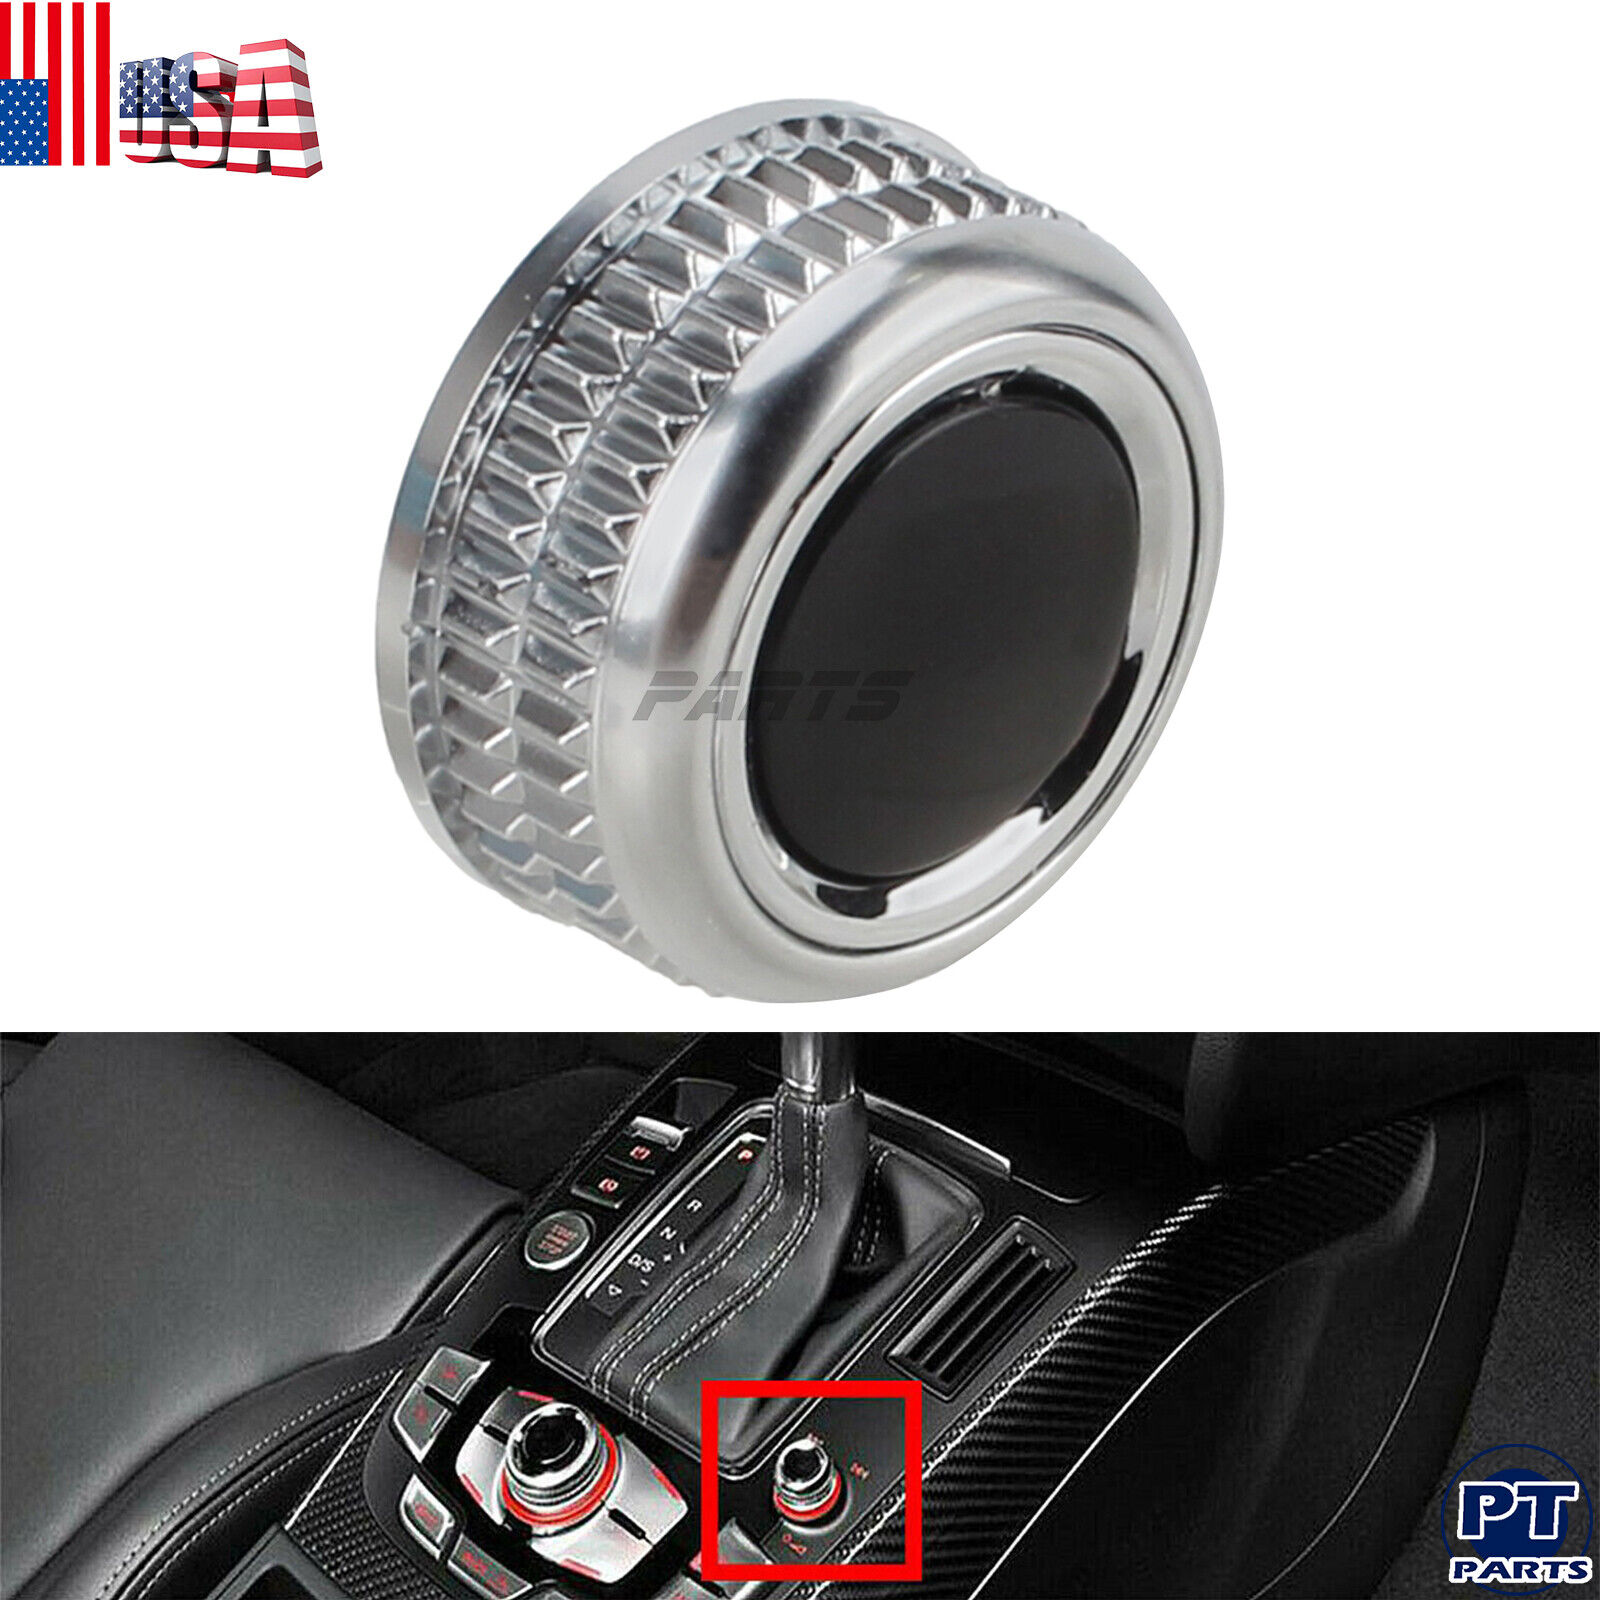 New MMI Volume Control Button Knob for Audi A4 S4 RS4 A5 S5 RS5 Q5 8T0919070B